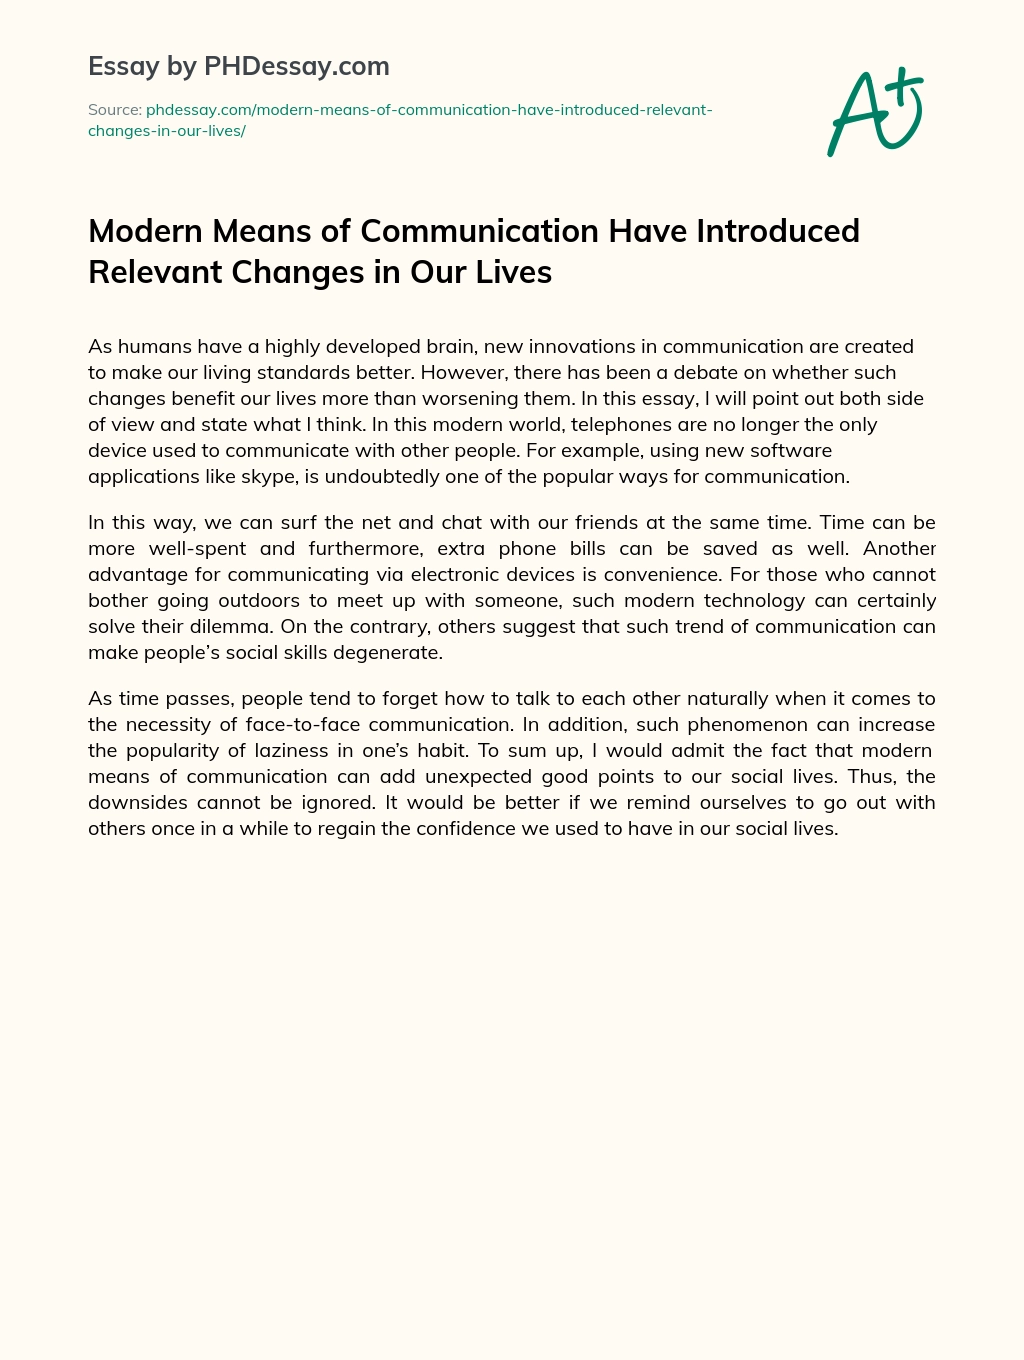 Modern Means of Communication Have Introduced Relevant Changes in Our Lives essay